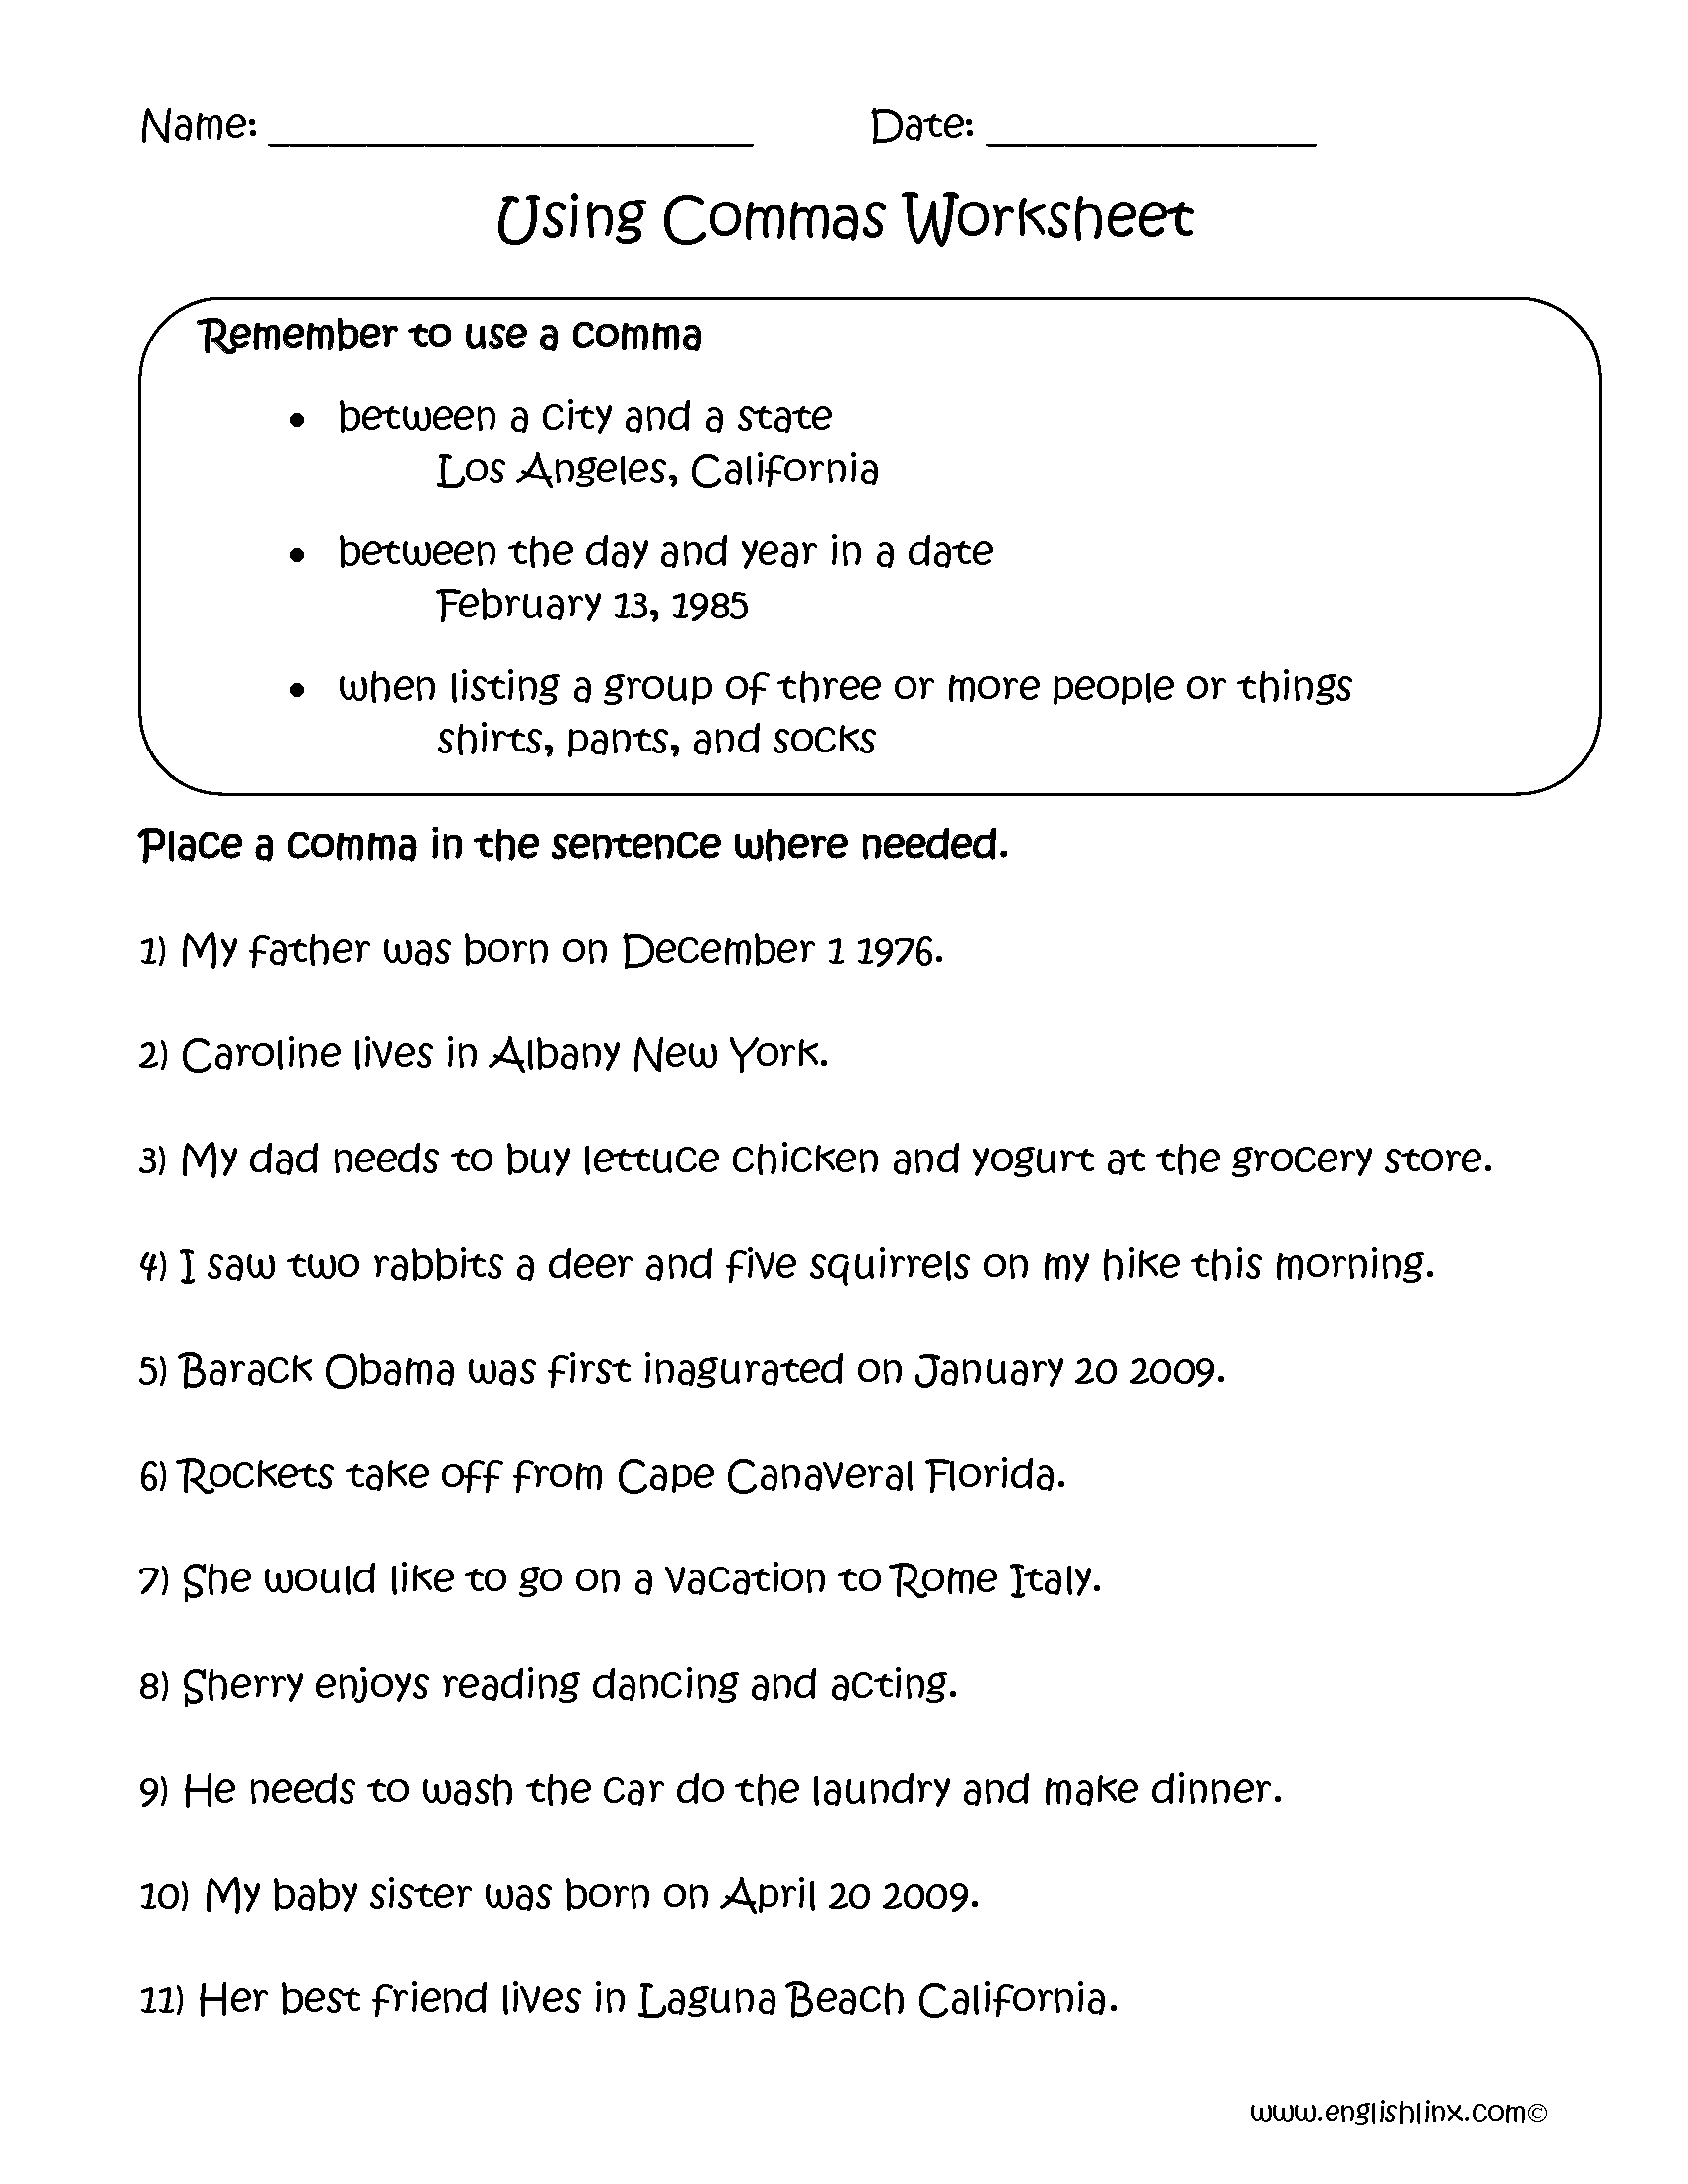 comma-worksheets-with-answers